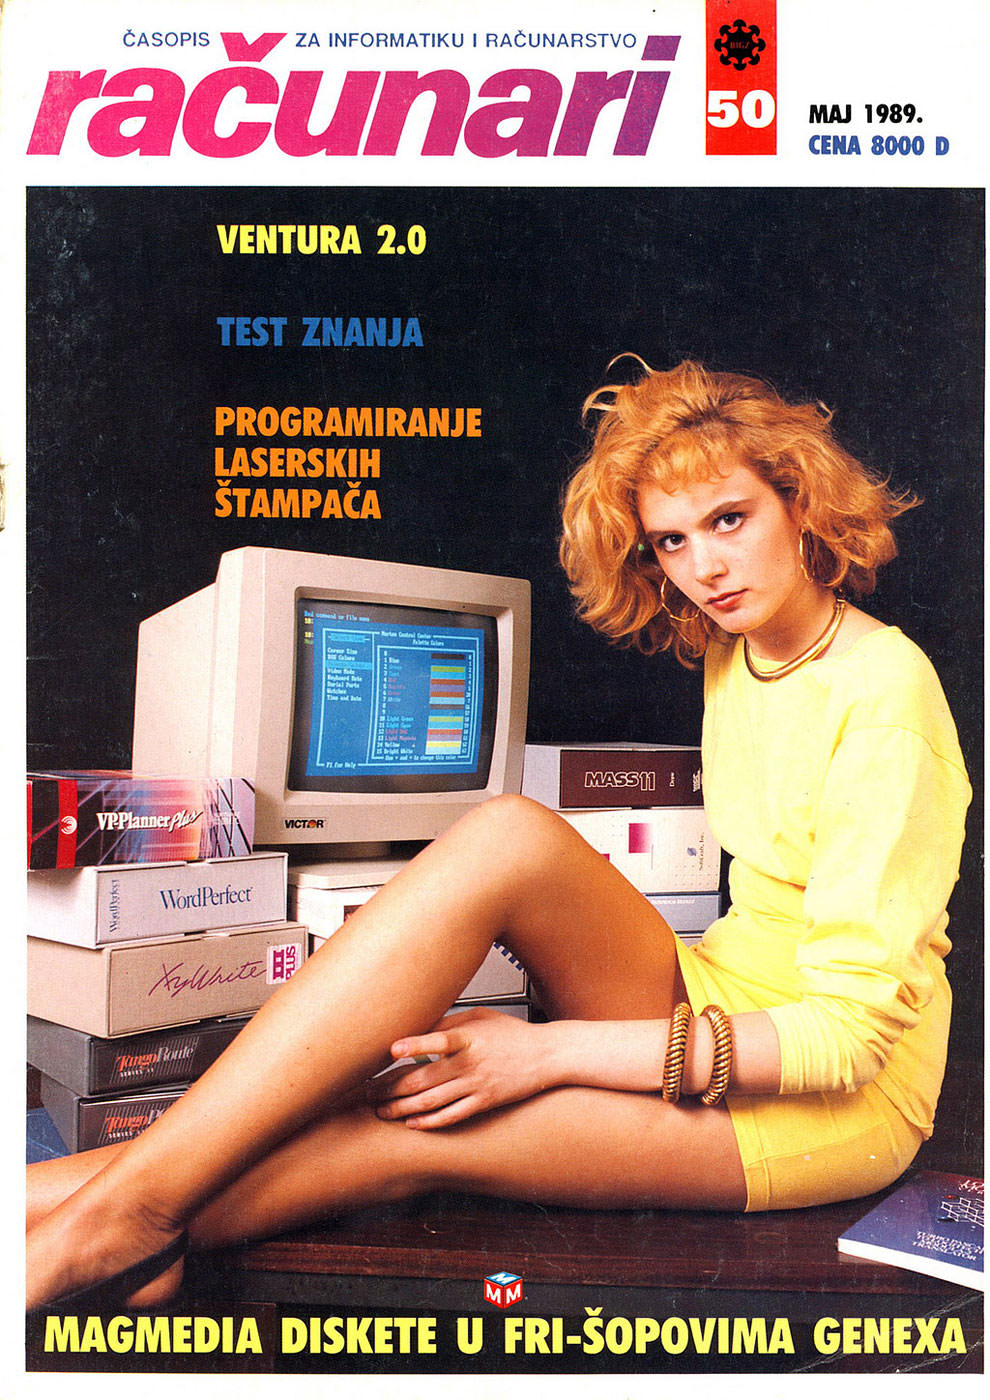 Sensual Vintage Yugoslavian Computer Magazine Covers Girls Of The 1980s-90s